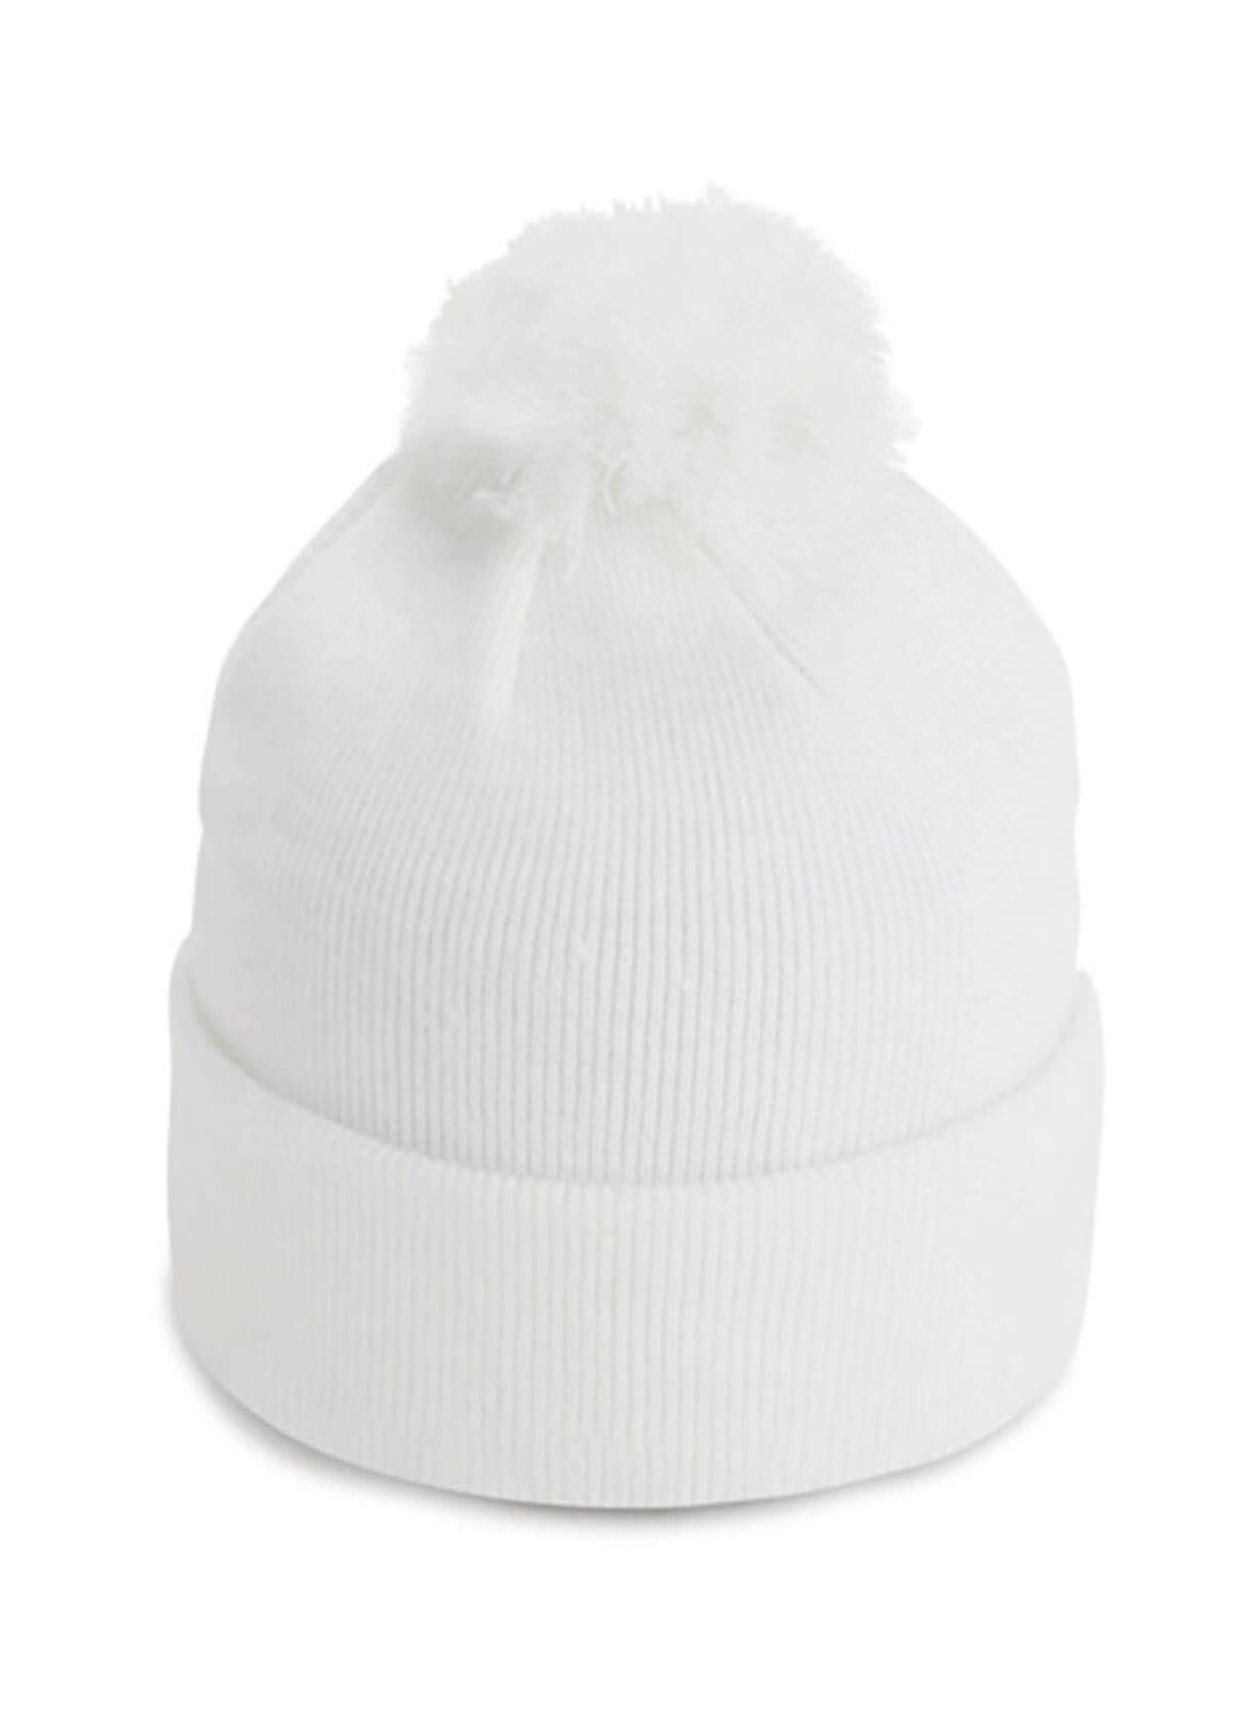 Imperial White The Tahoe Knit Beanie with Pom